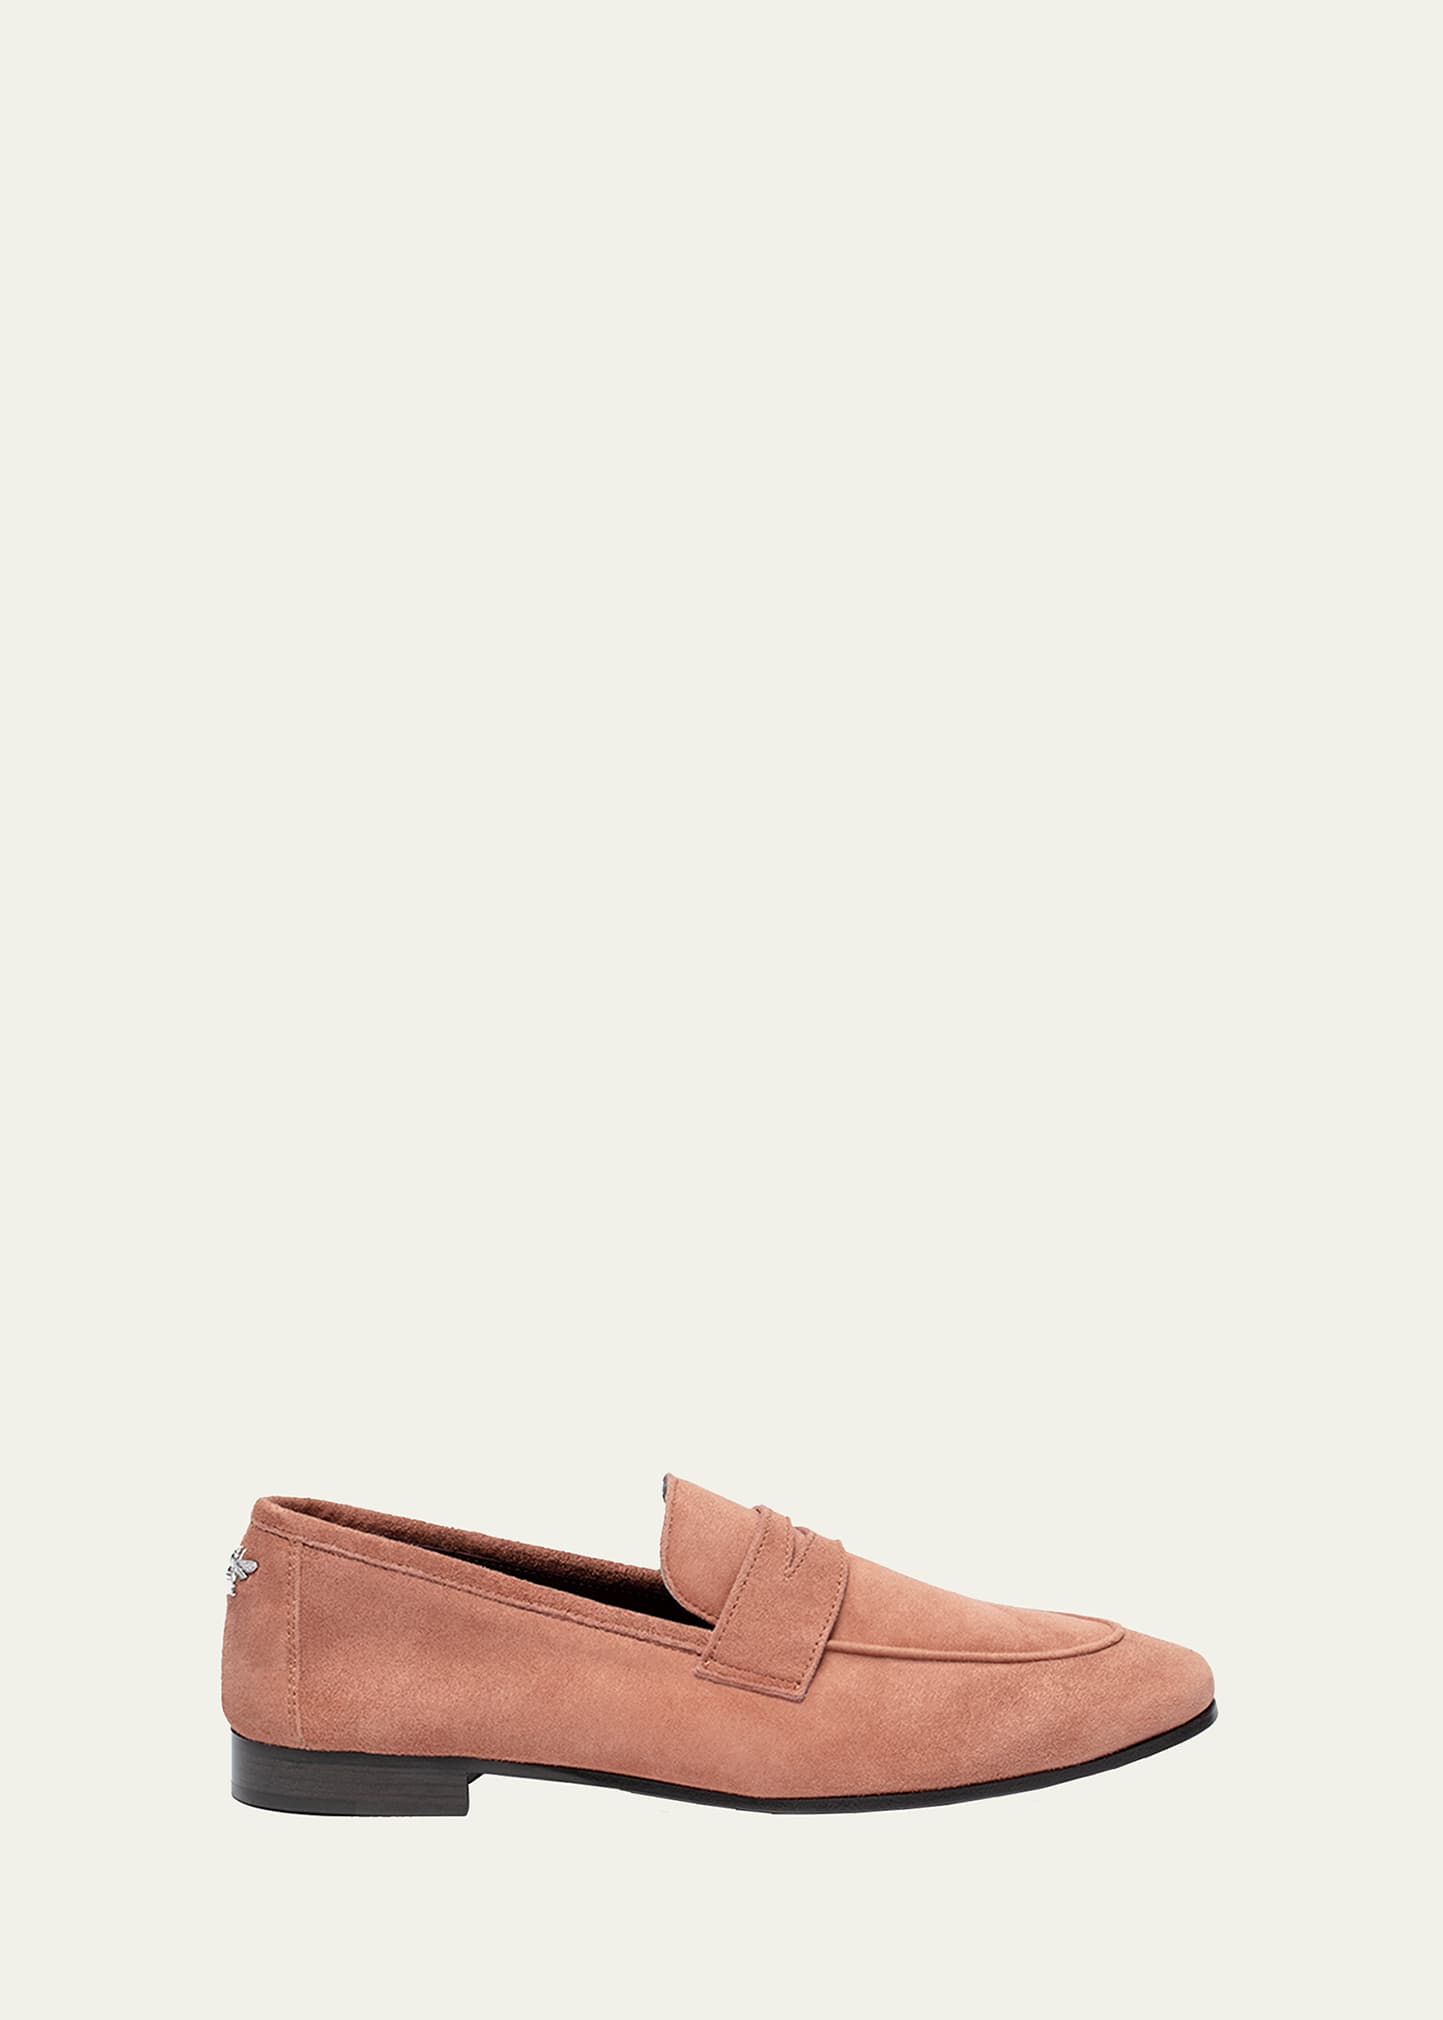 Bougeotte Poudre Suede Penny Loafers